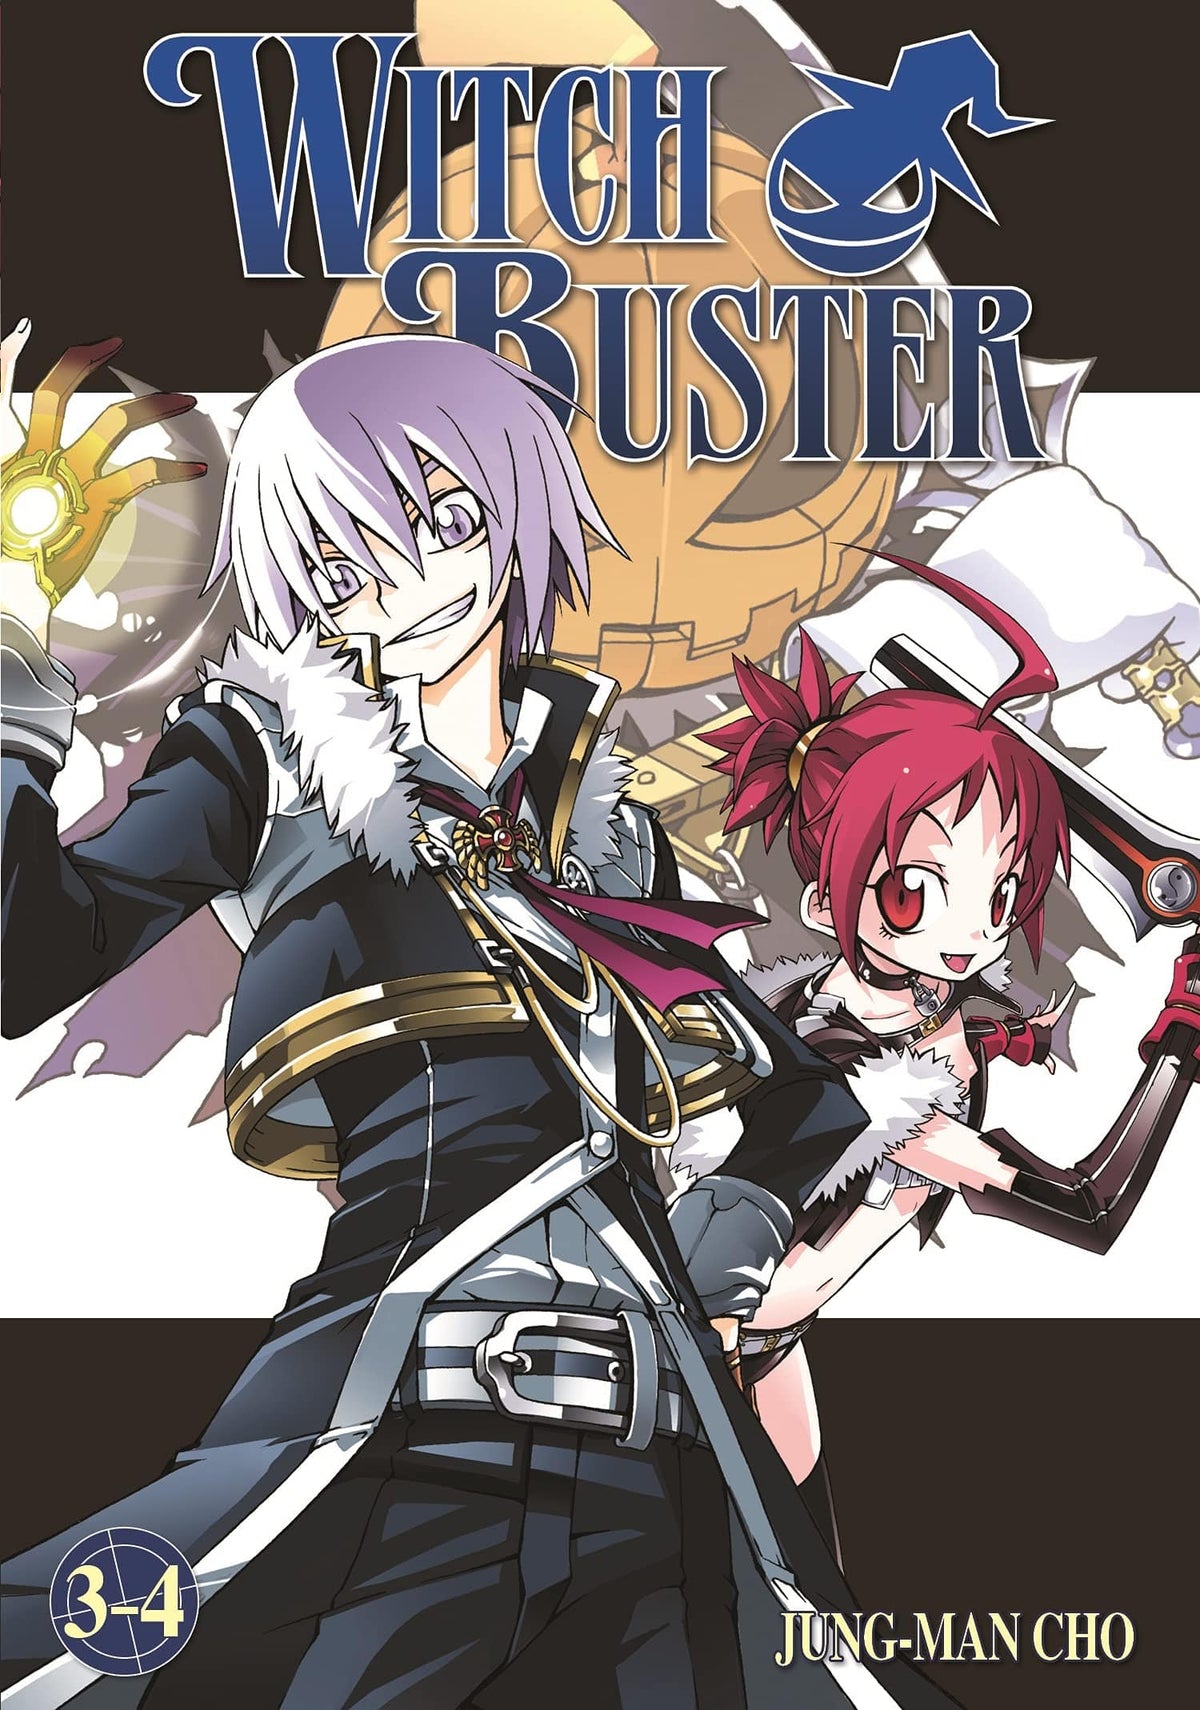 Witch Buster Vol. 3/4 - Third Eye